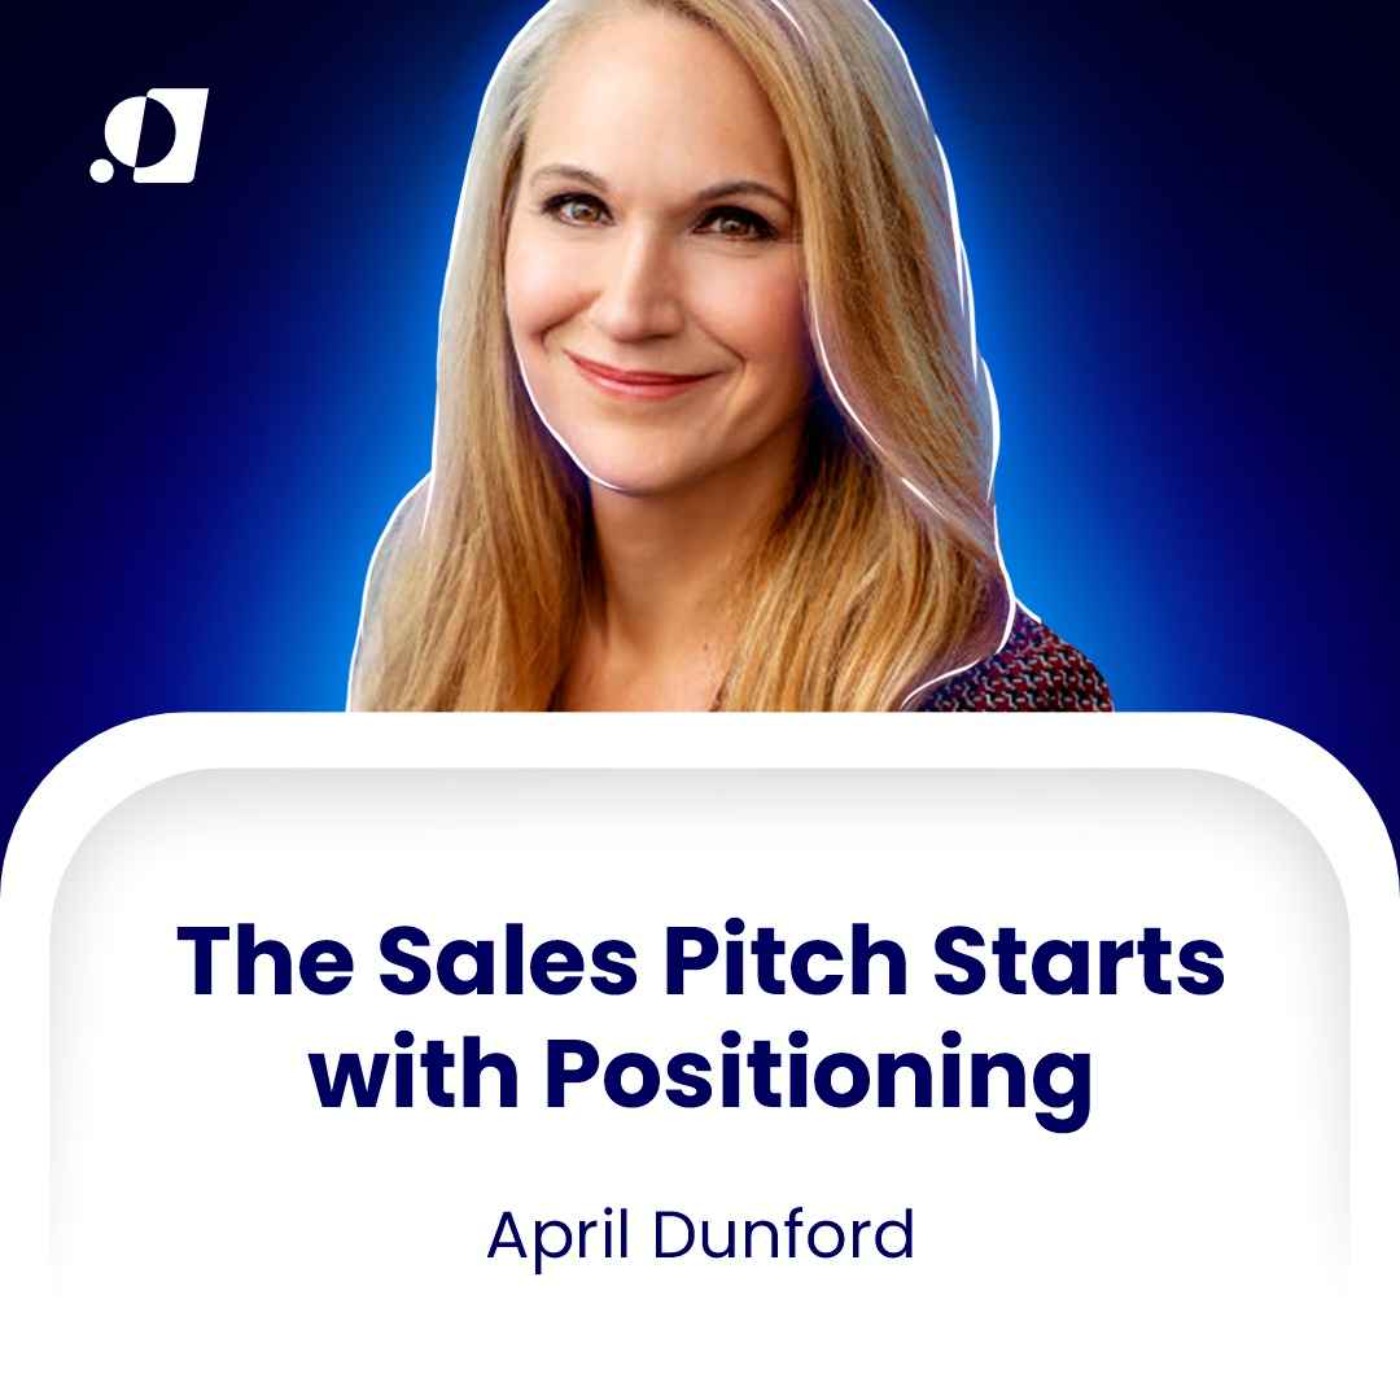 #20 - The Sales Pitch Starts with Positioning - April Dunford